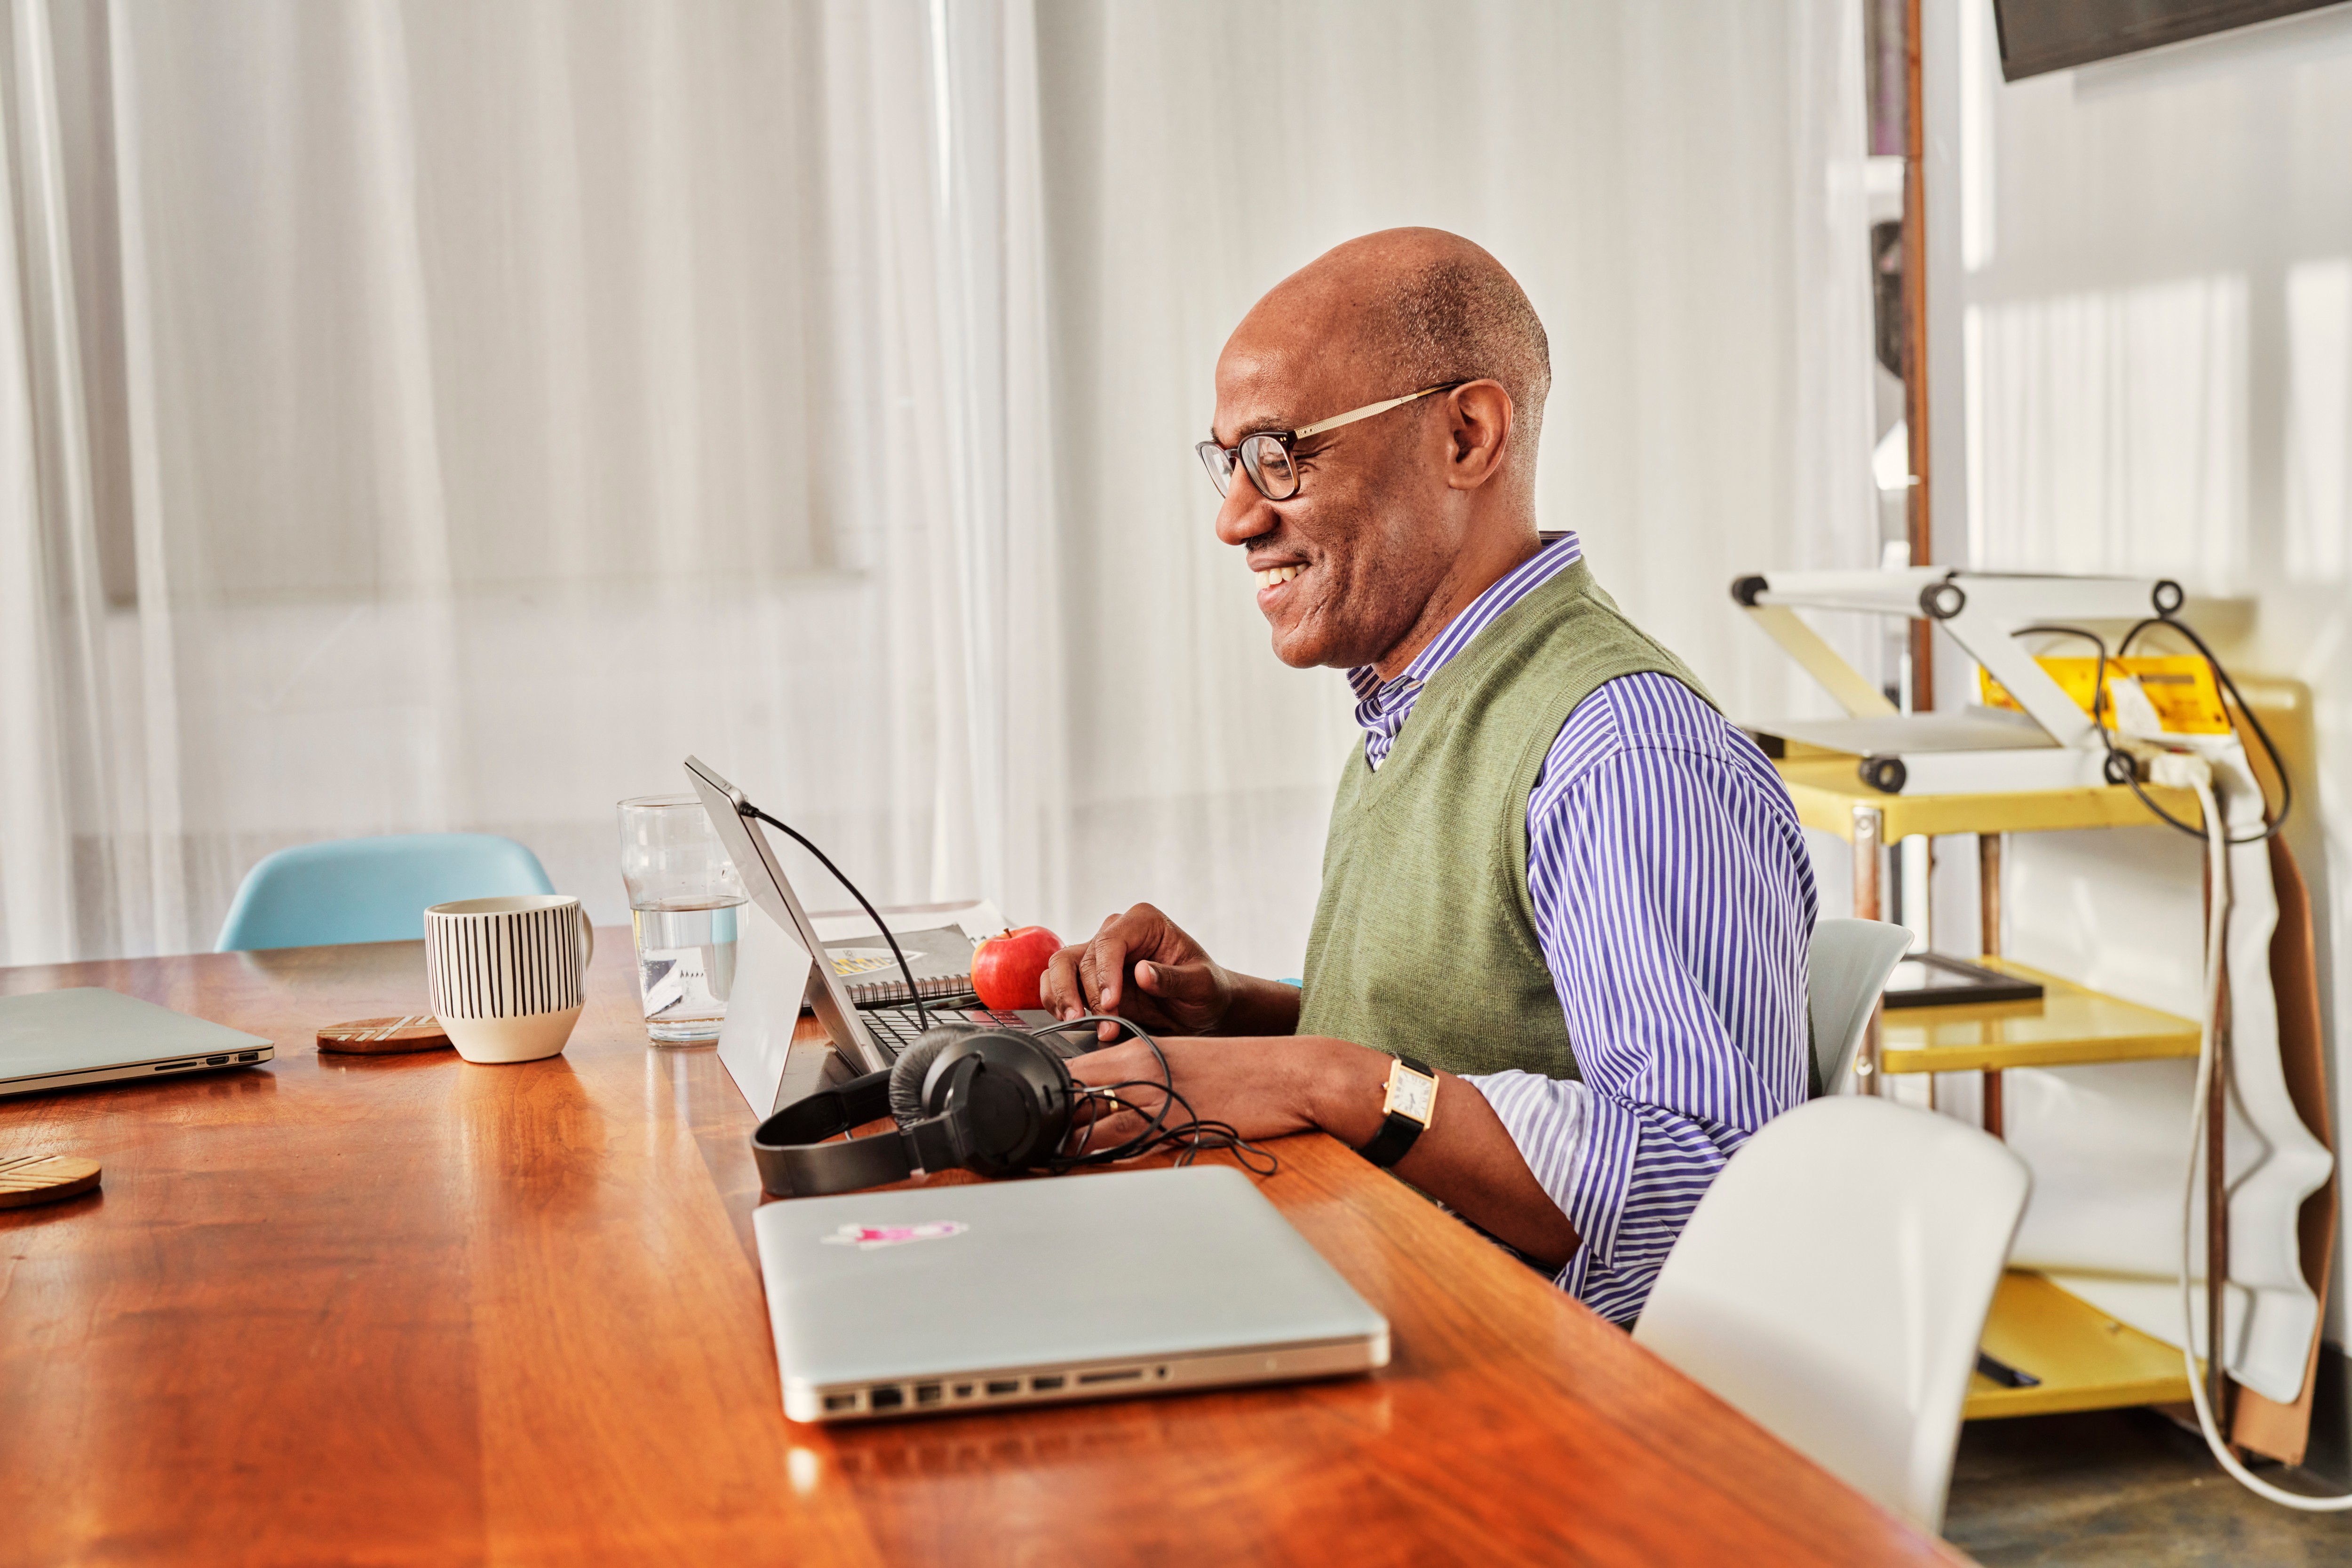 Image of a smiling man sitting in front of a laptop.